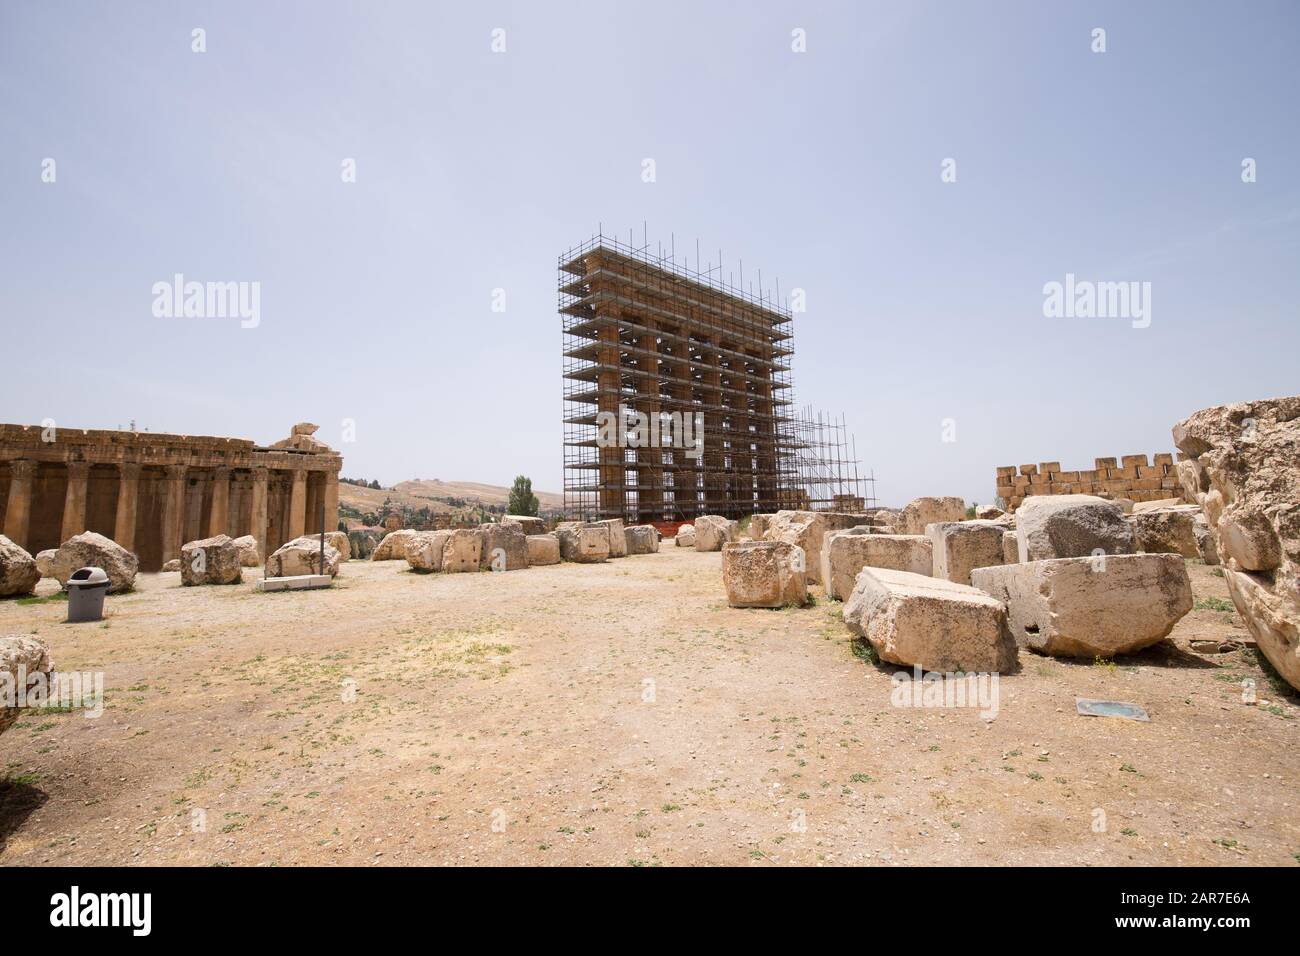 Temple of Jupiter. The ruins of the Roman city of Heliopolis or Baalbek in the Beqaa Valley. Baalbek, Lebanon - June, 2019 Stock Photo